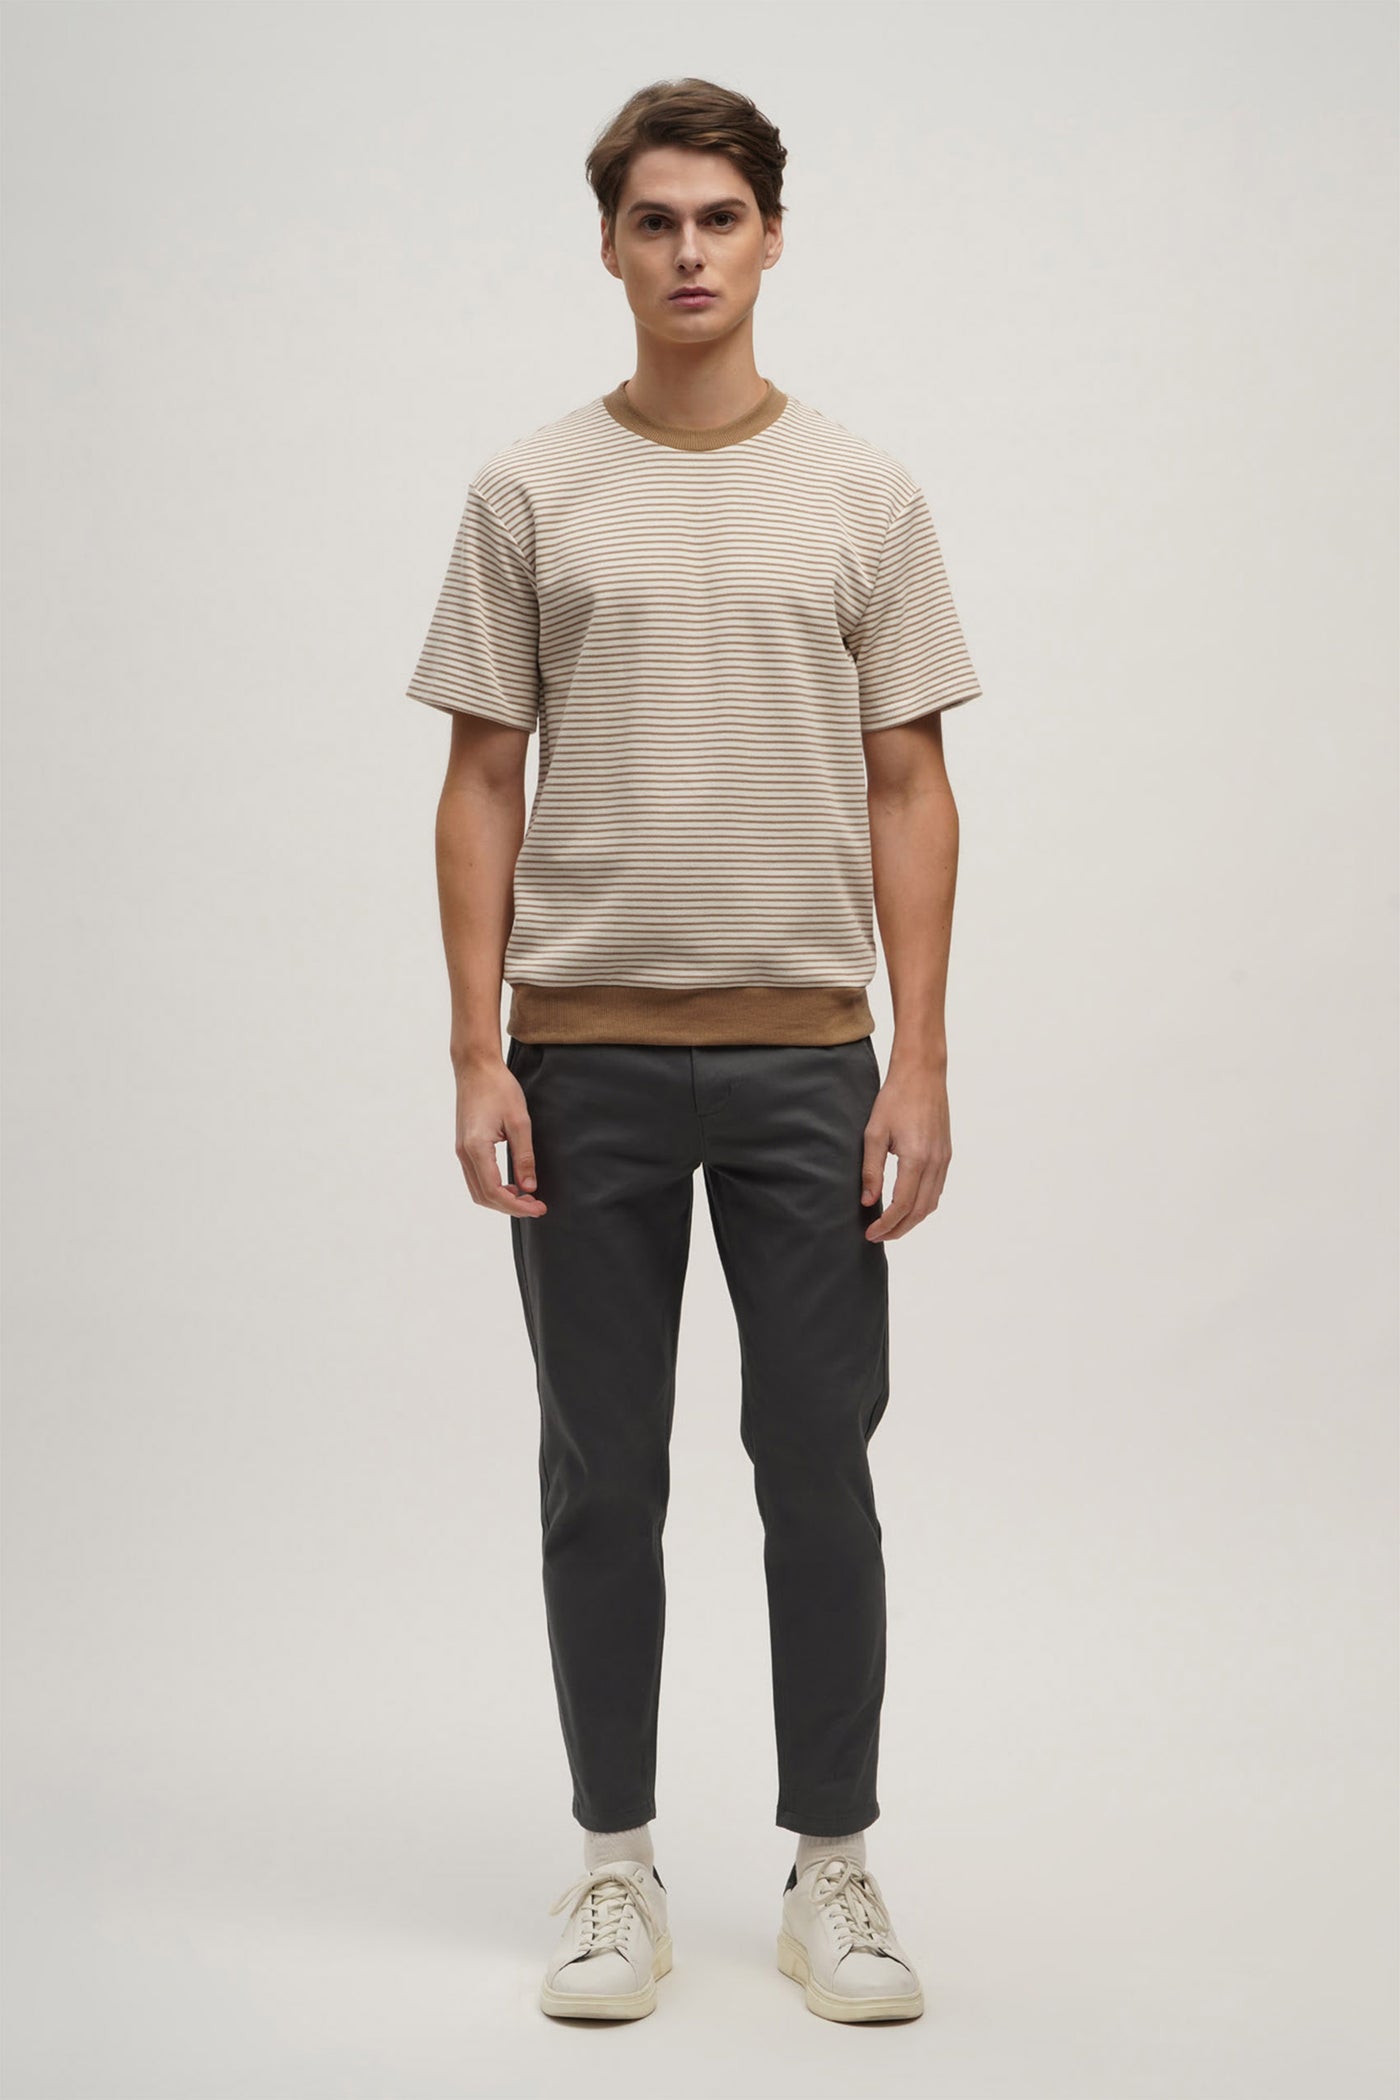 Textured Ringer Tee With Hemband